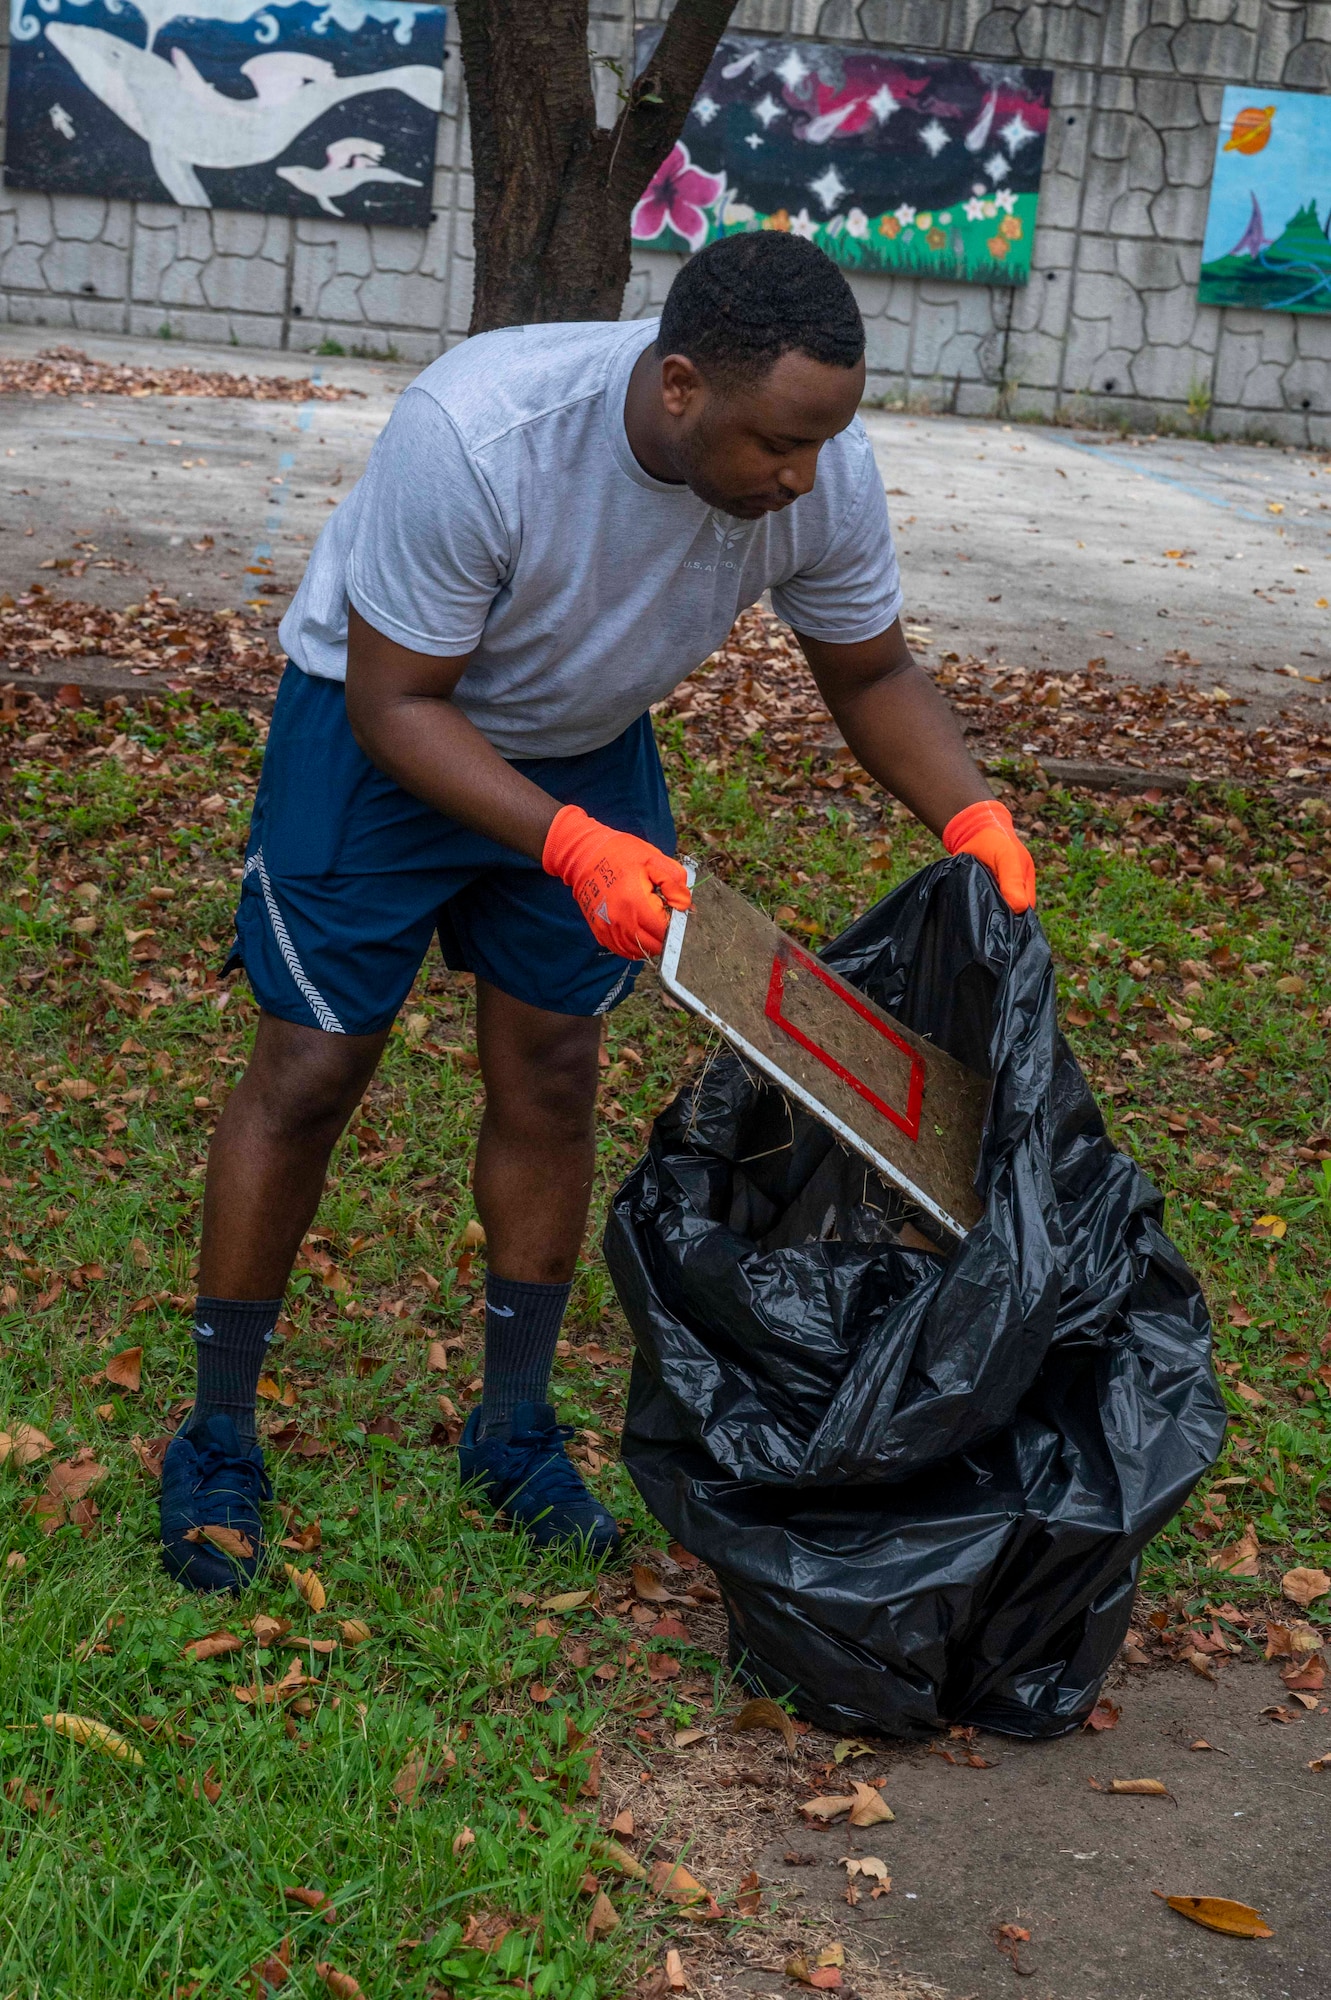 U.S. Air Force Staff Sgt. Quashon Skinner, 51st Medical Support Squadron pharmacy noncommissioned officer in charge, picks up trash during a base clean up at Osan Air Base, Republic of Korea, Sept. 13, 2023. Throughout the installation, Airmen and civilians came together to remove litter, gather recyclables and clear debris with the aim of preserving base infrastructure and maintaining environmental standards. (U.S. Air Force photo by Senior Airman Aaron Edwards)